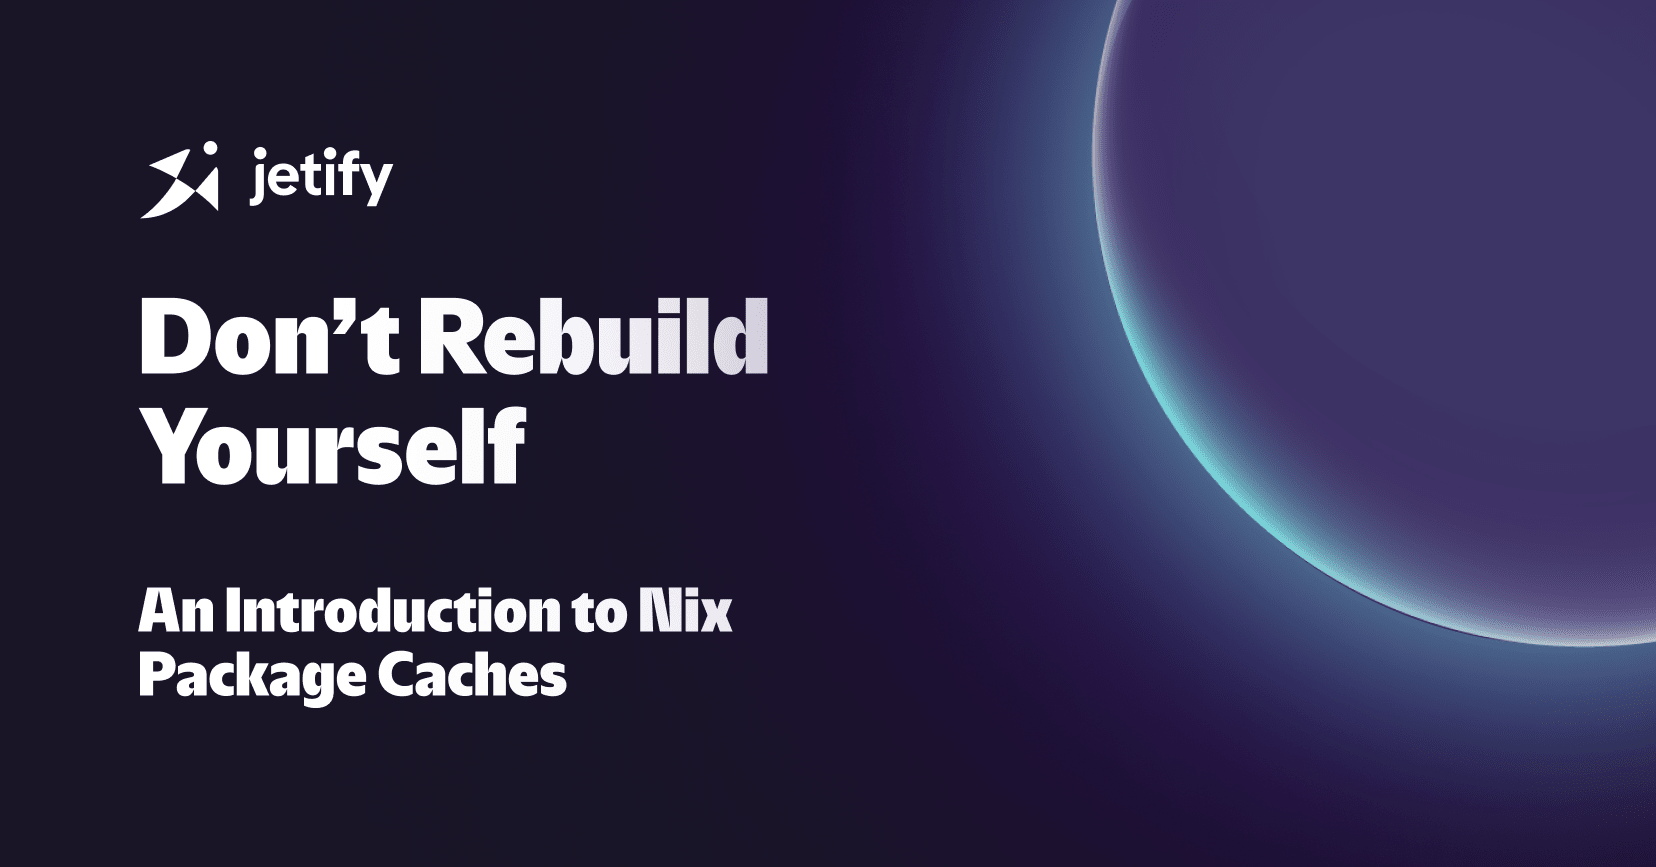 Don't Rebuild Yourself - an Intro to Nix Package Caches